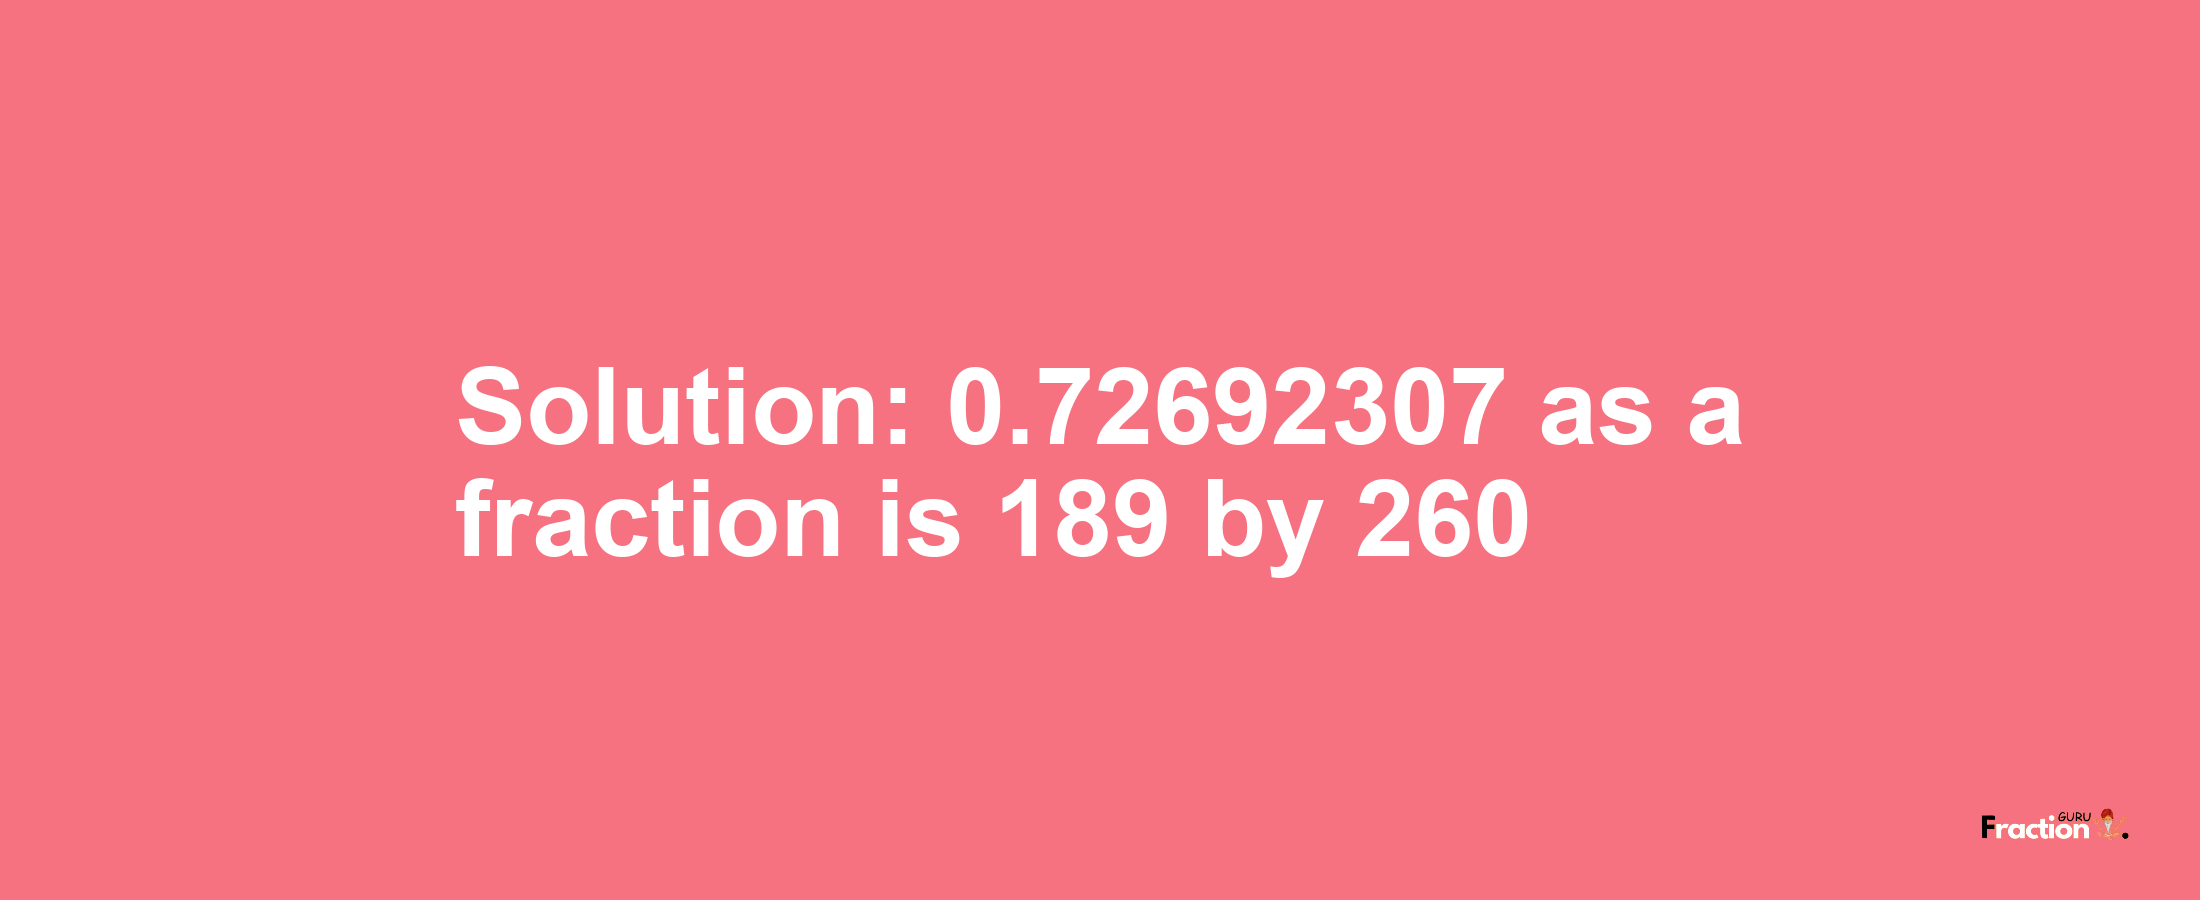 Solution:0.72692307 as a fraction is 189/260